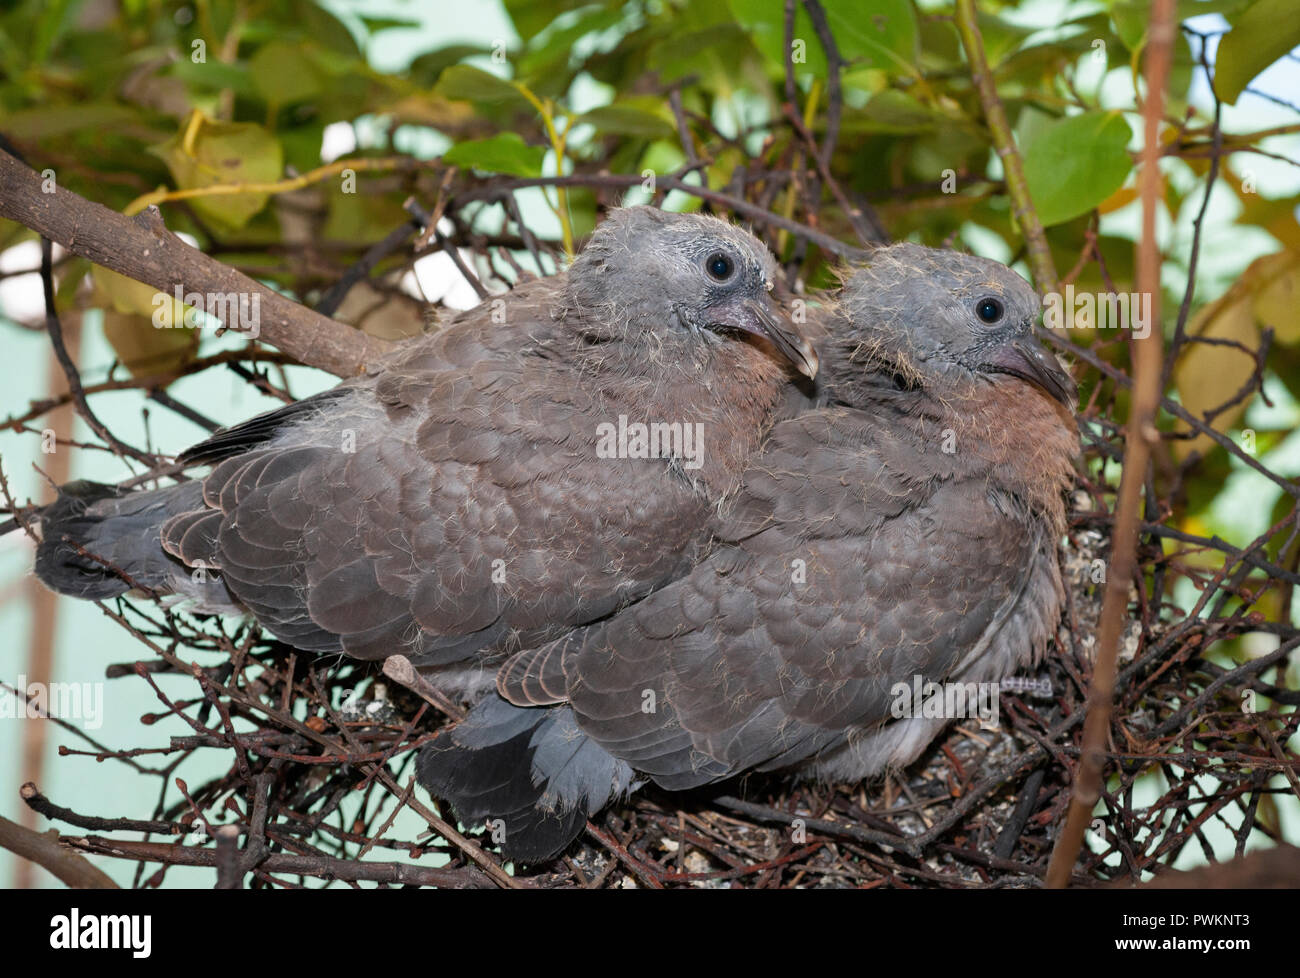 Woodpigeon Chicks, Columba palumbus, altrcial in Nest, Londres, Royaume-Uni Banque D'Images